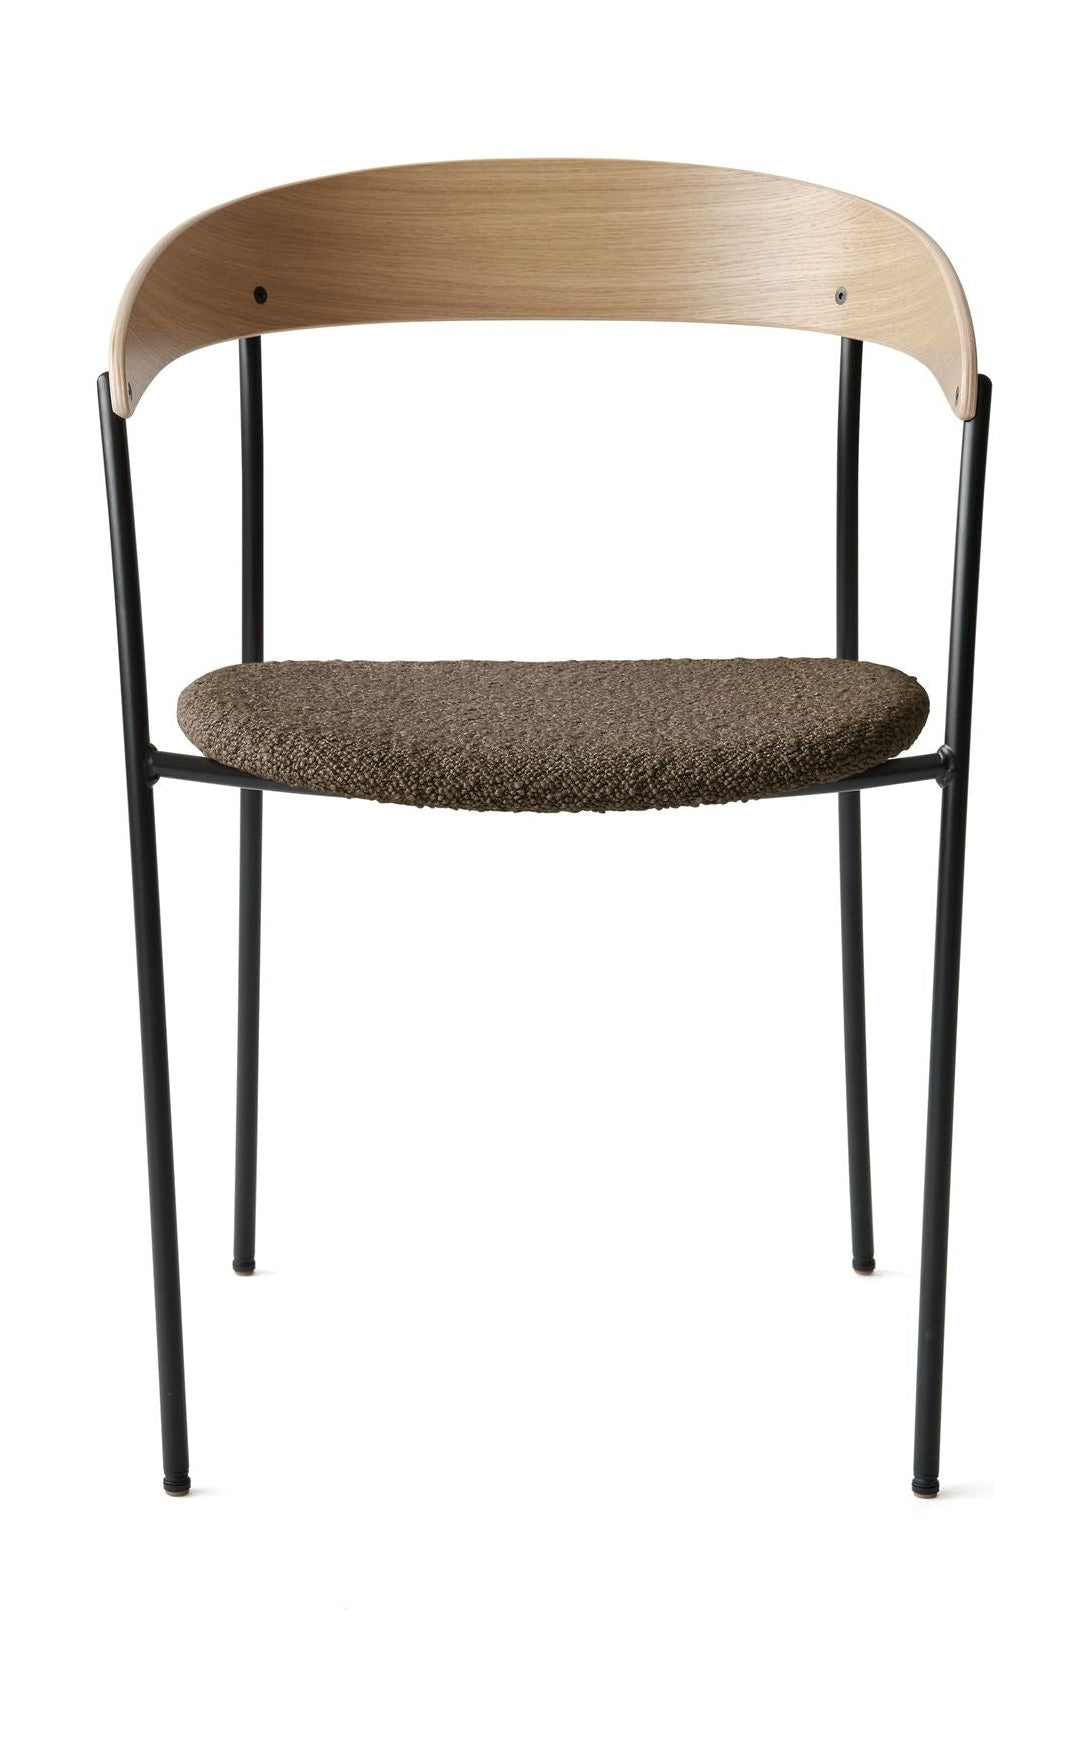 New Works Ontbrekende fauteuil eik, donkere taupe